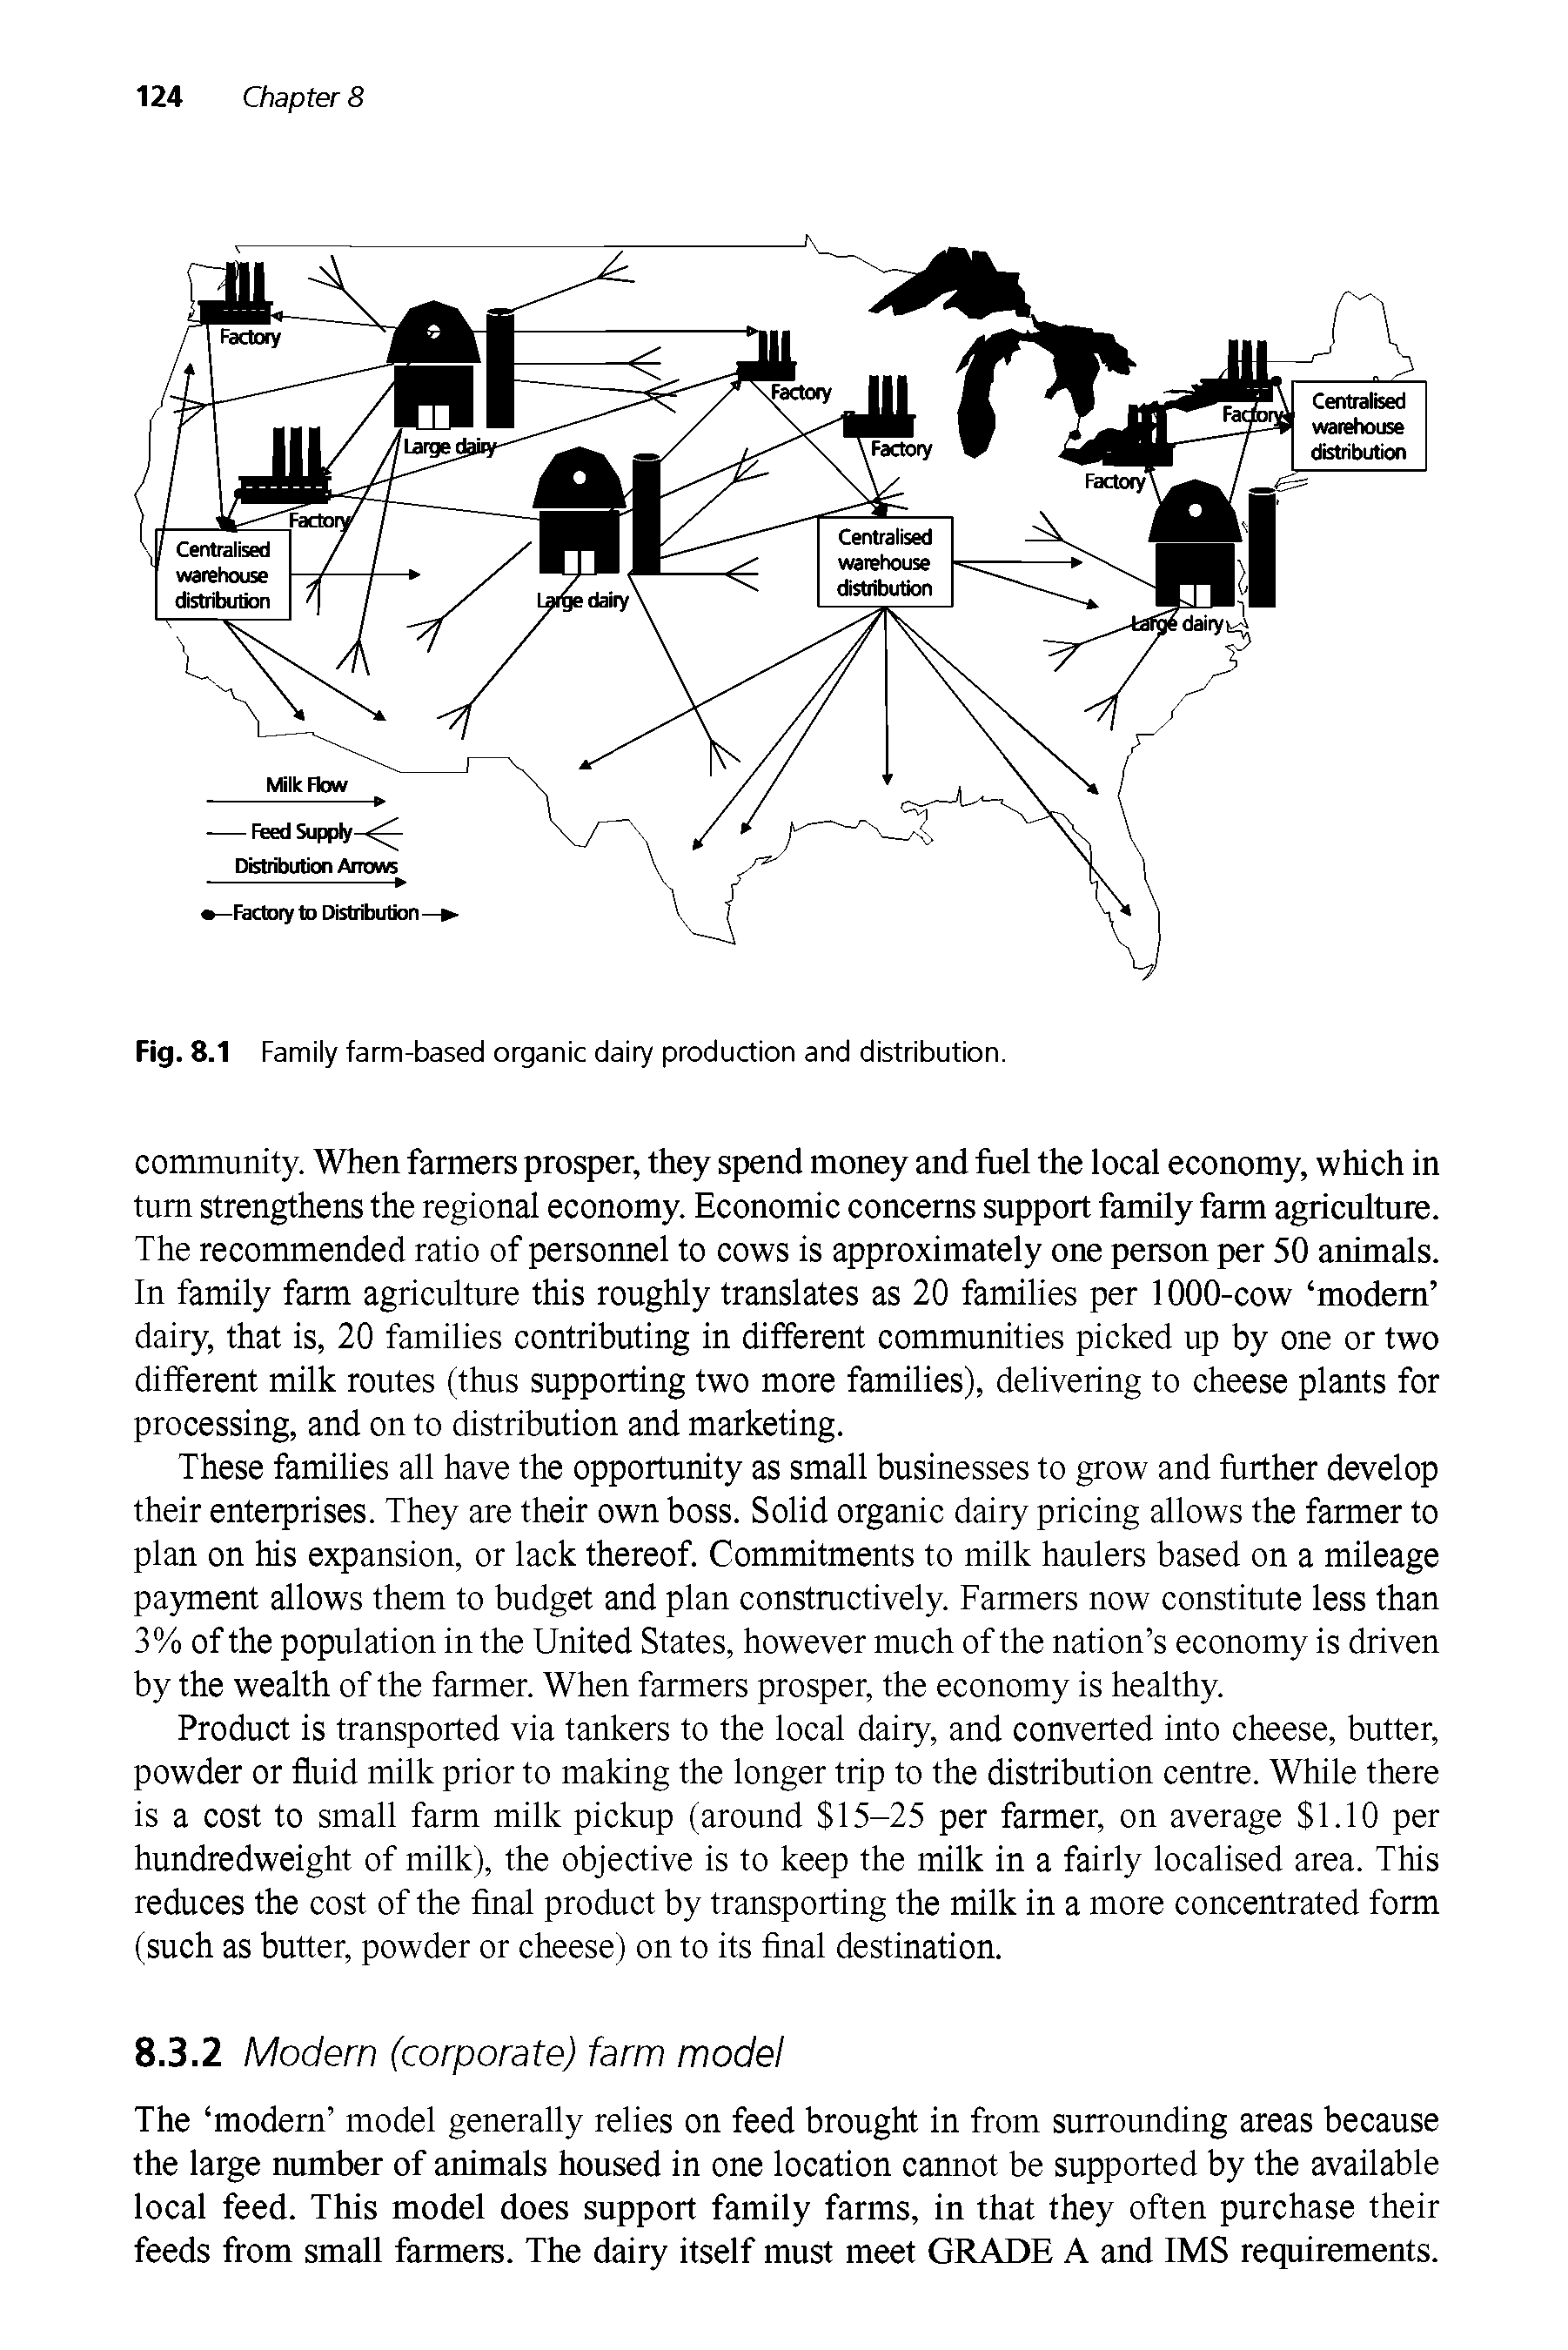 Fig. 8.1 Family farm-based organic dairy production and distribution.